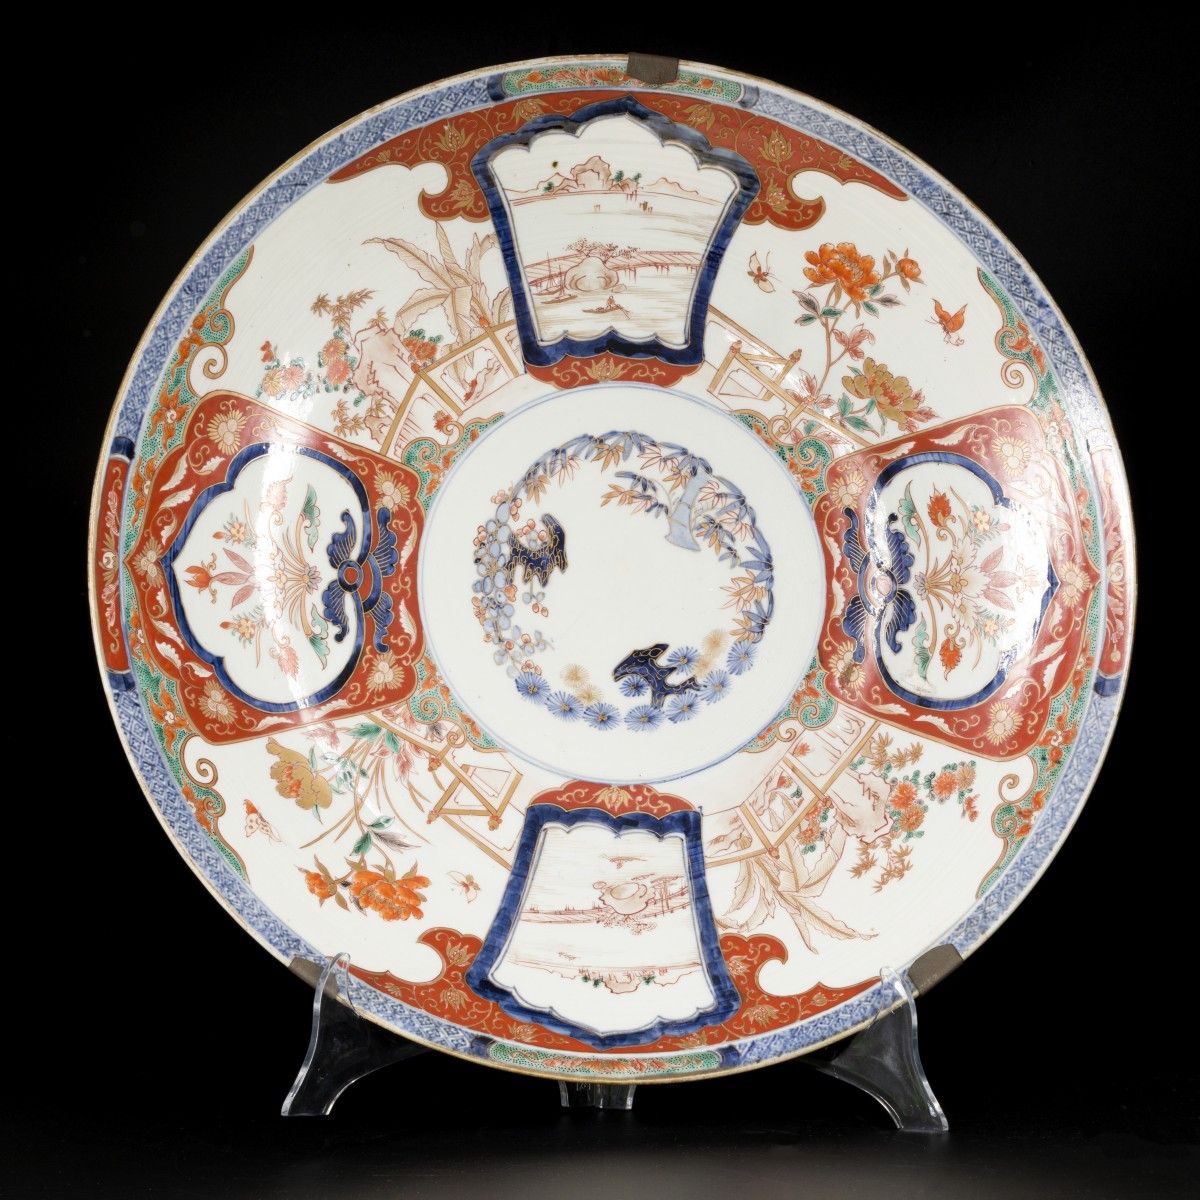 A large Imari dish with floral decoration and landscapes on the outside. Japan, &hellip;